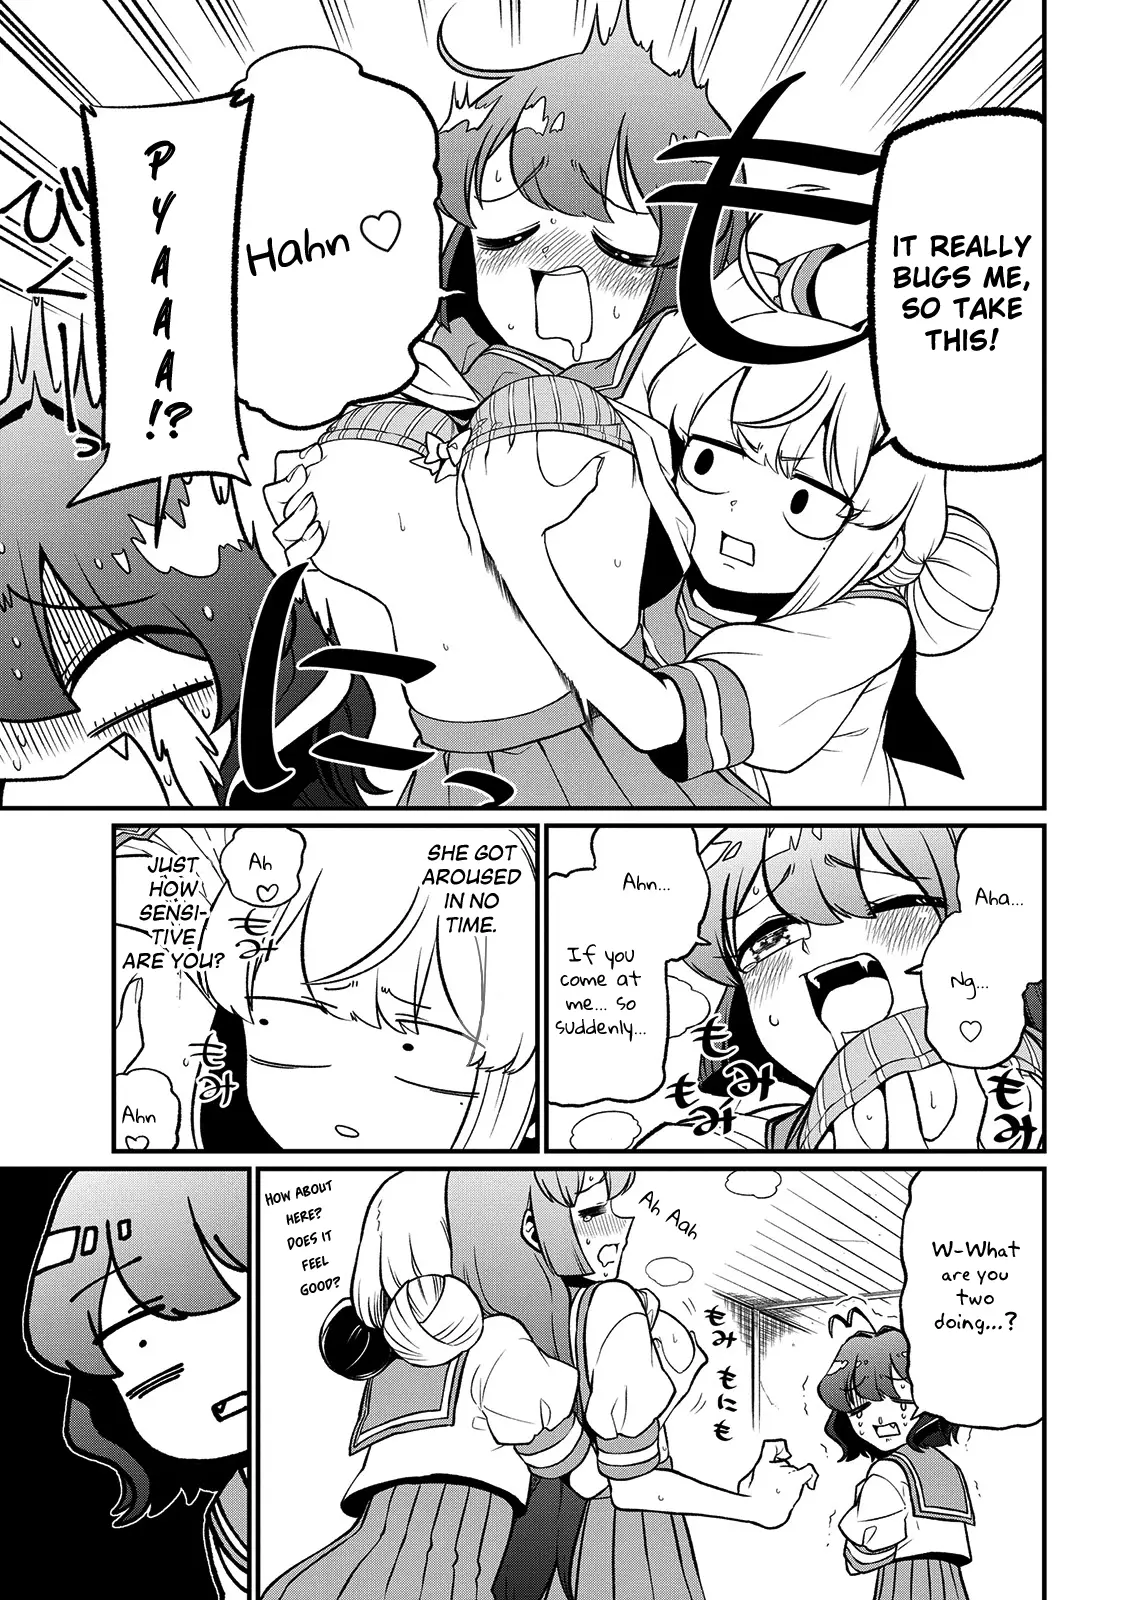 Looking Up To Magical Girls - 40 page 25-1459f3dd